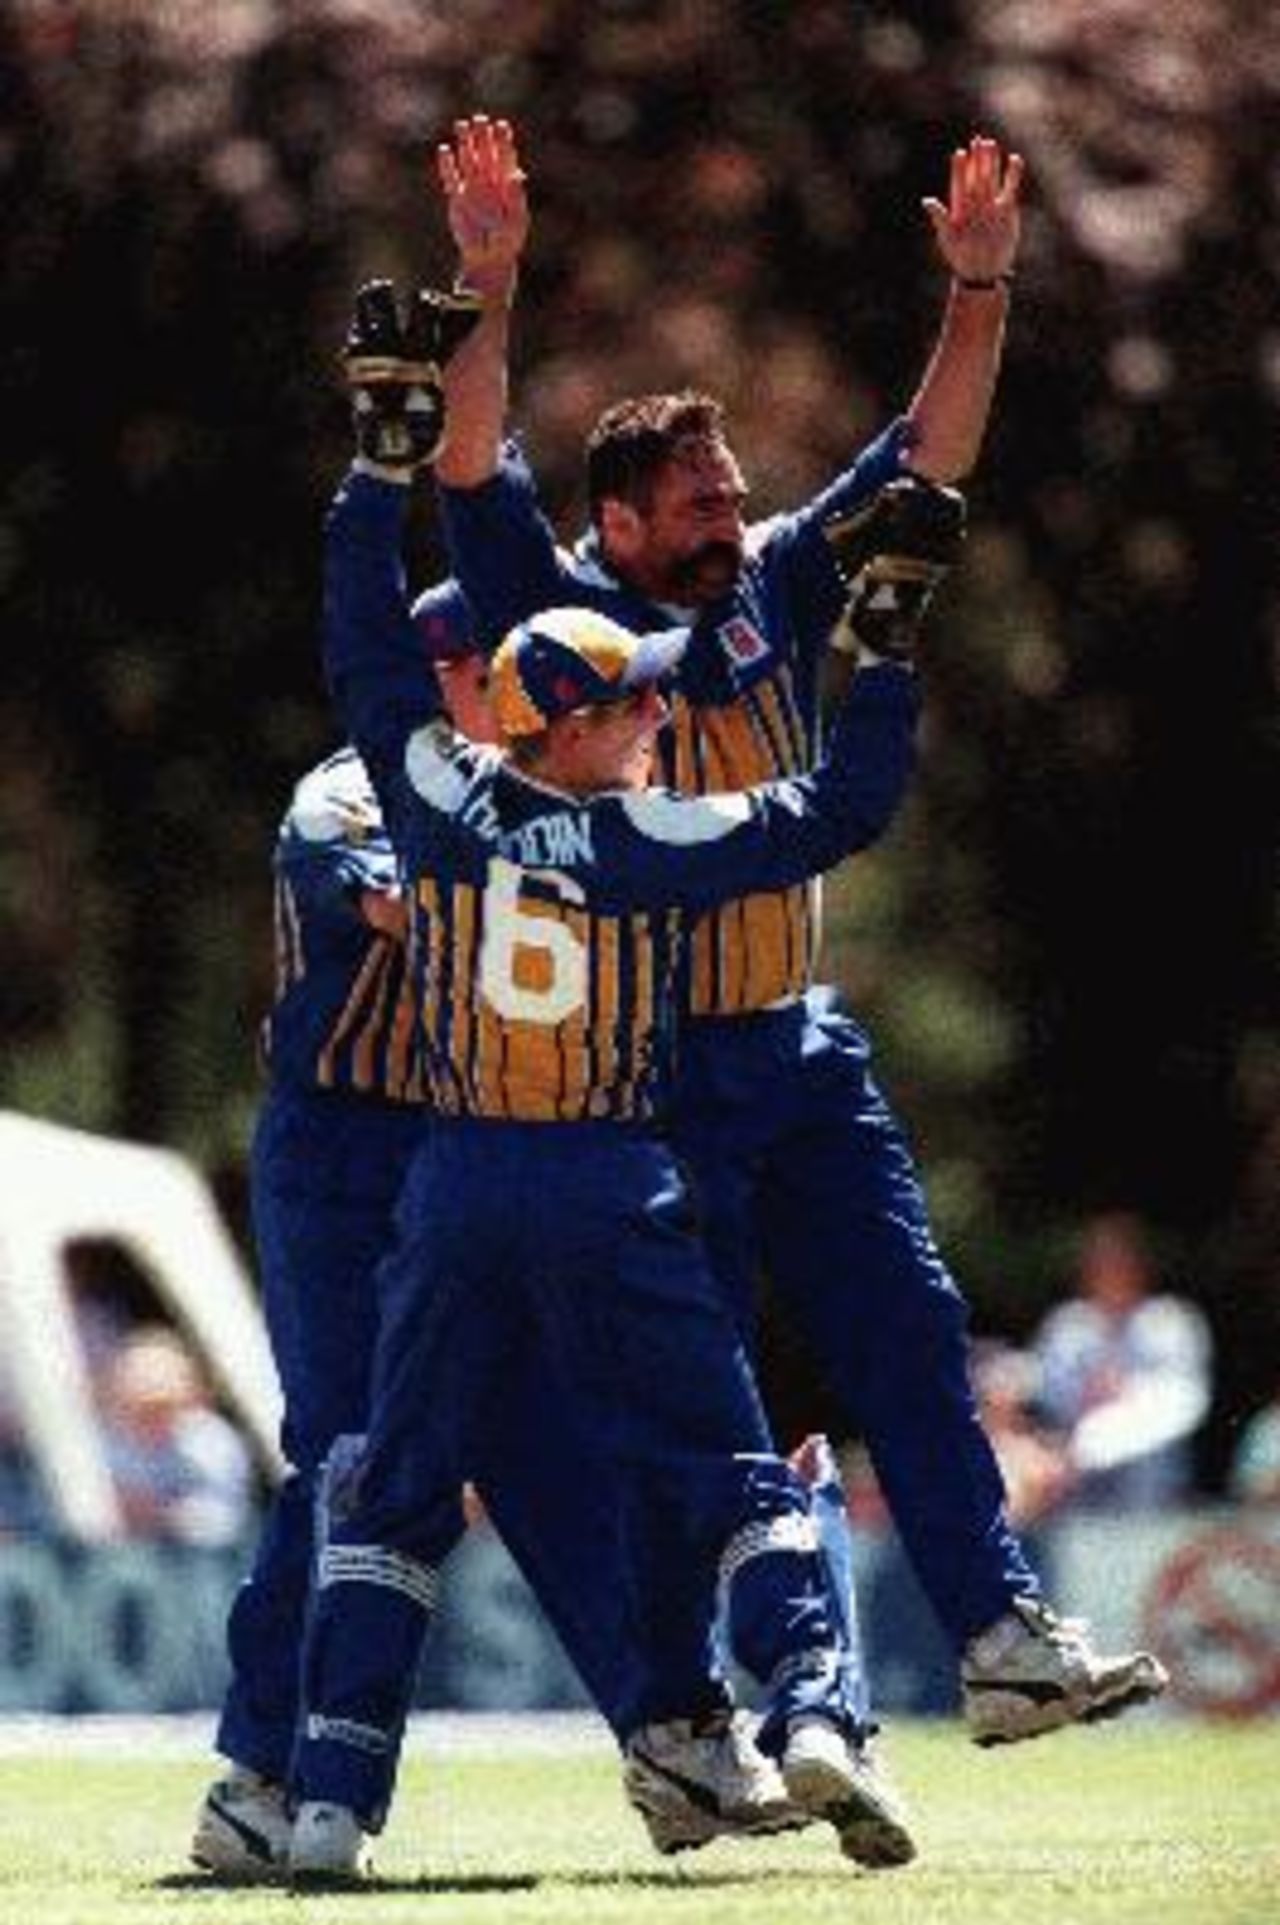 Big Merv stands tall !! Merv Hughes congratulated by team-mates (Keeper Brad Haddin #6) after taking his first wicket for ACT, that of SA capt Jamie Siddons, caught by Lemin, bowled Hughes for zero. SA def ACT Mercantile Mutual Cup at Manuka Oval Canberra Sunday November 2nd 1997